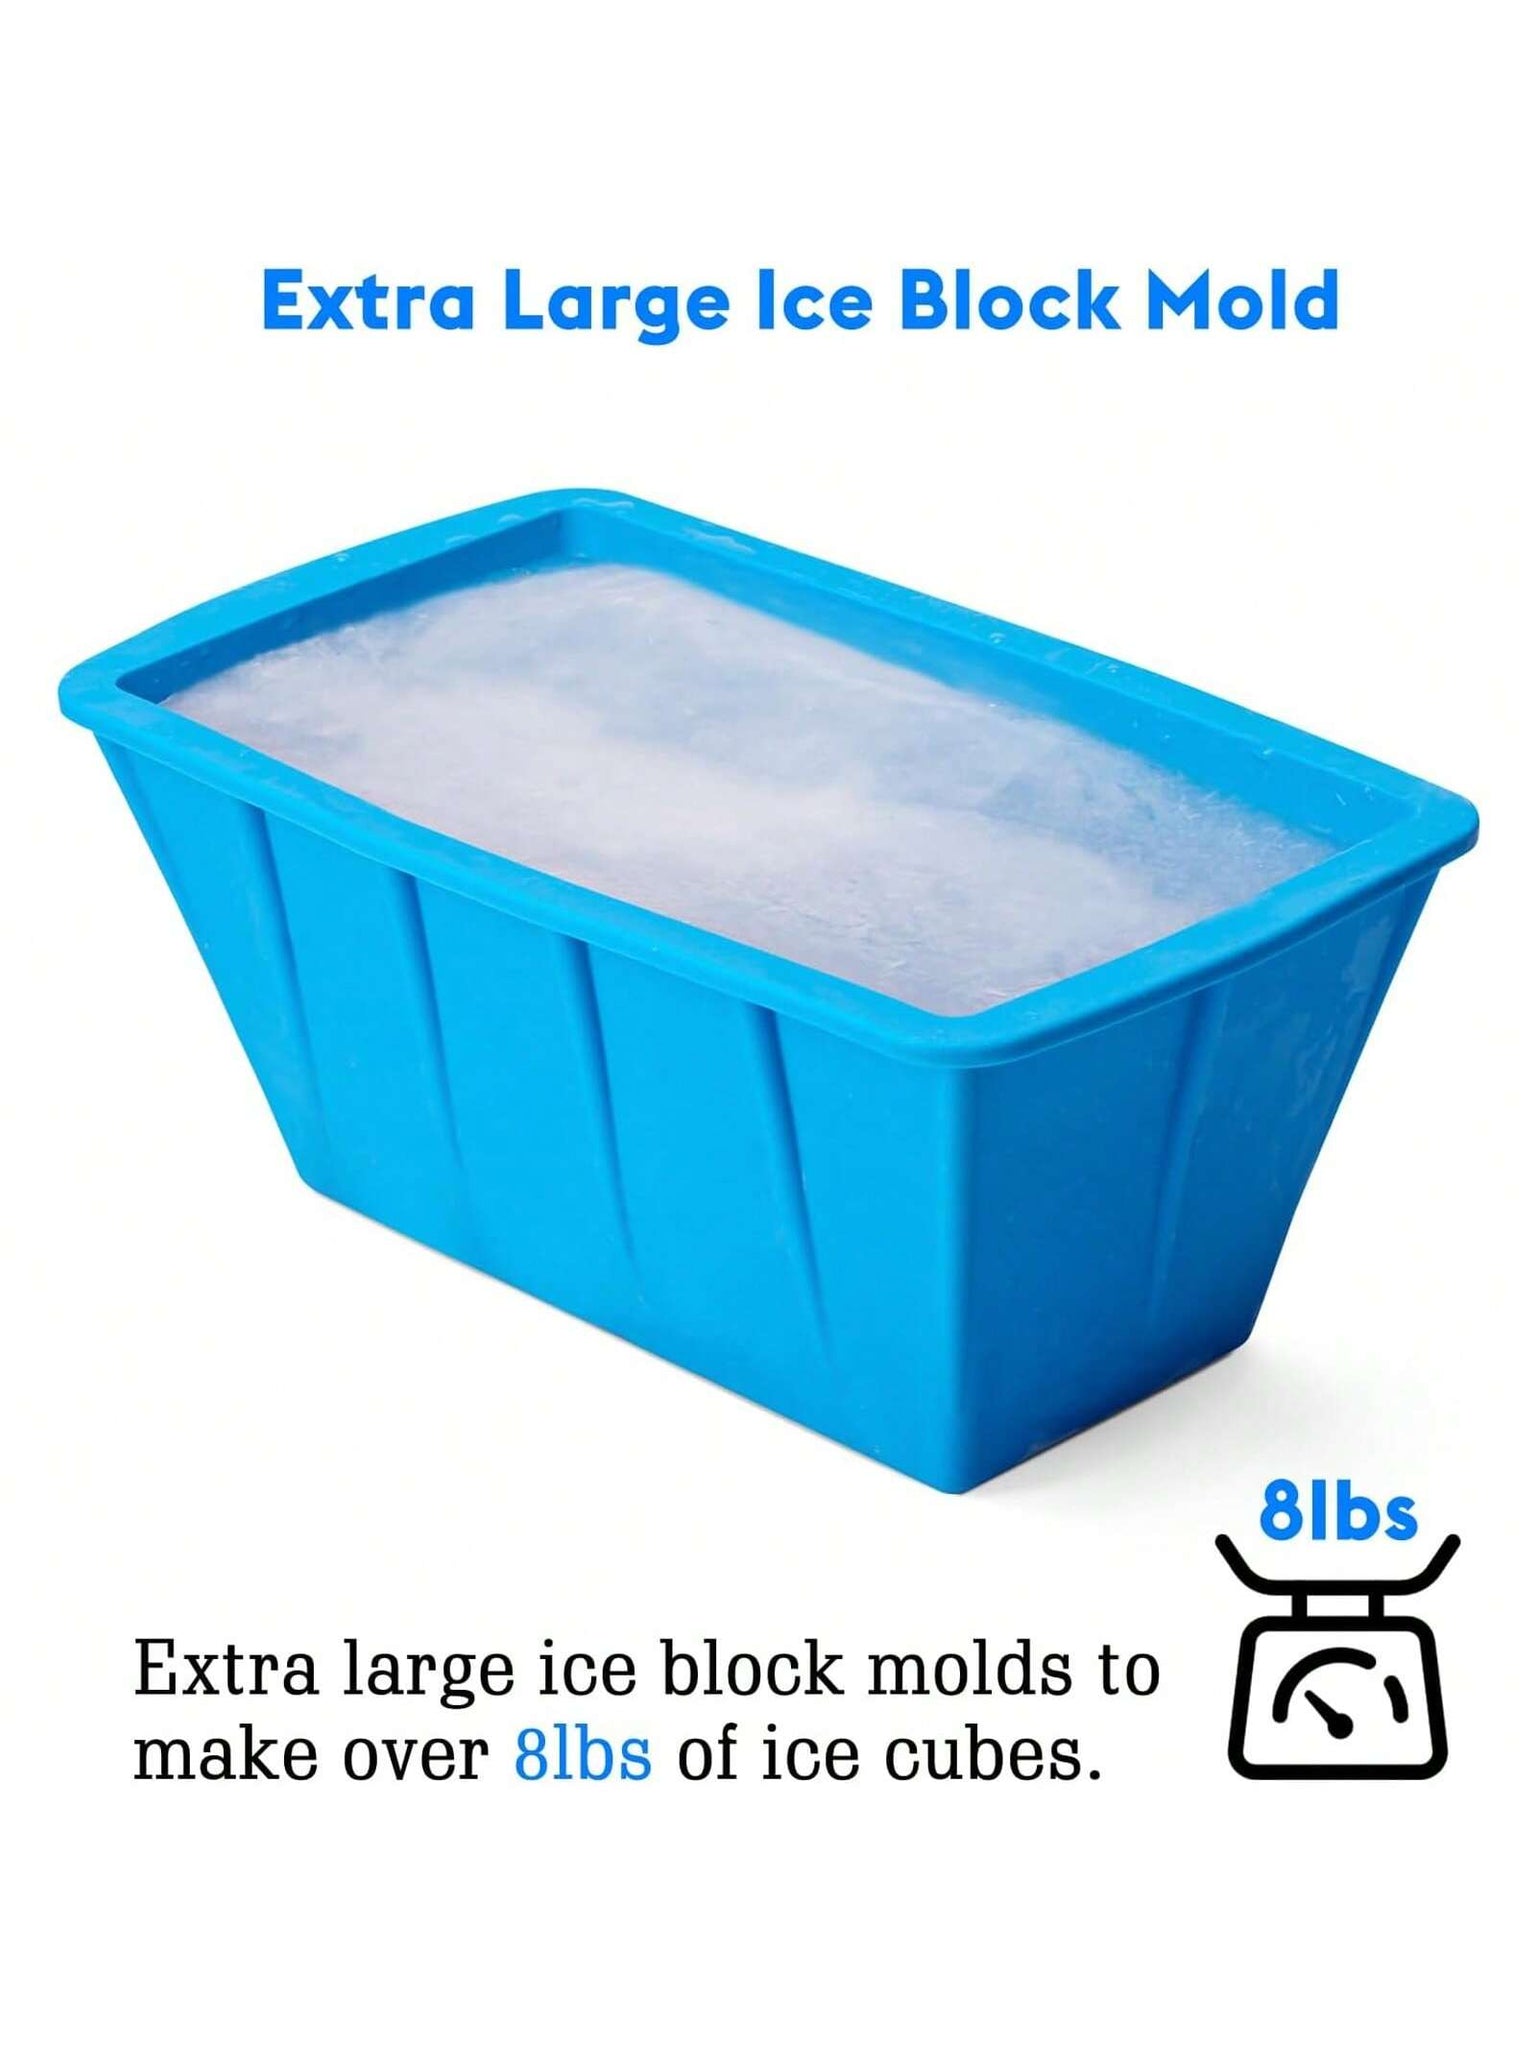 Polar Blocks Extra Large Ice Block Mold, 8lb Ice Block, Ice Maker for Cold  Plunge and Ice Bath, Reusable Steel Reinforced Silicone Molds, Big Ice Cube